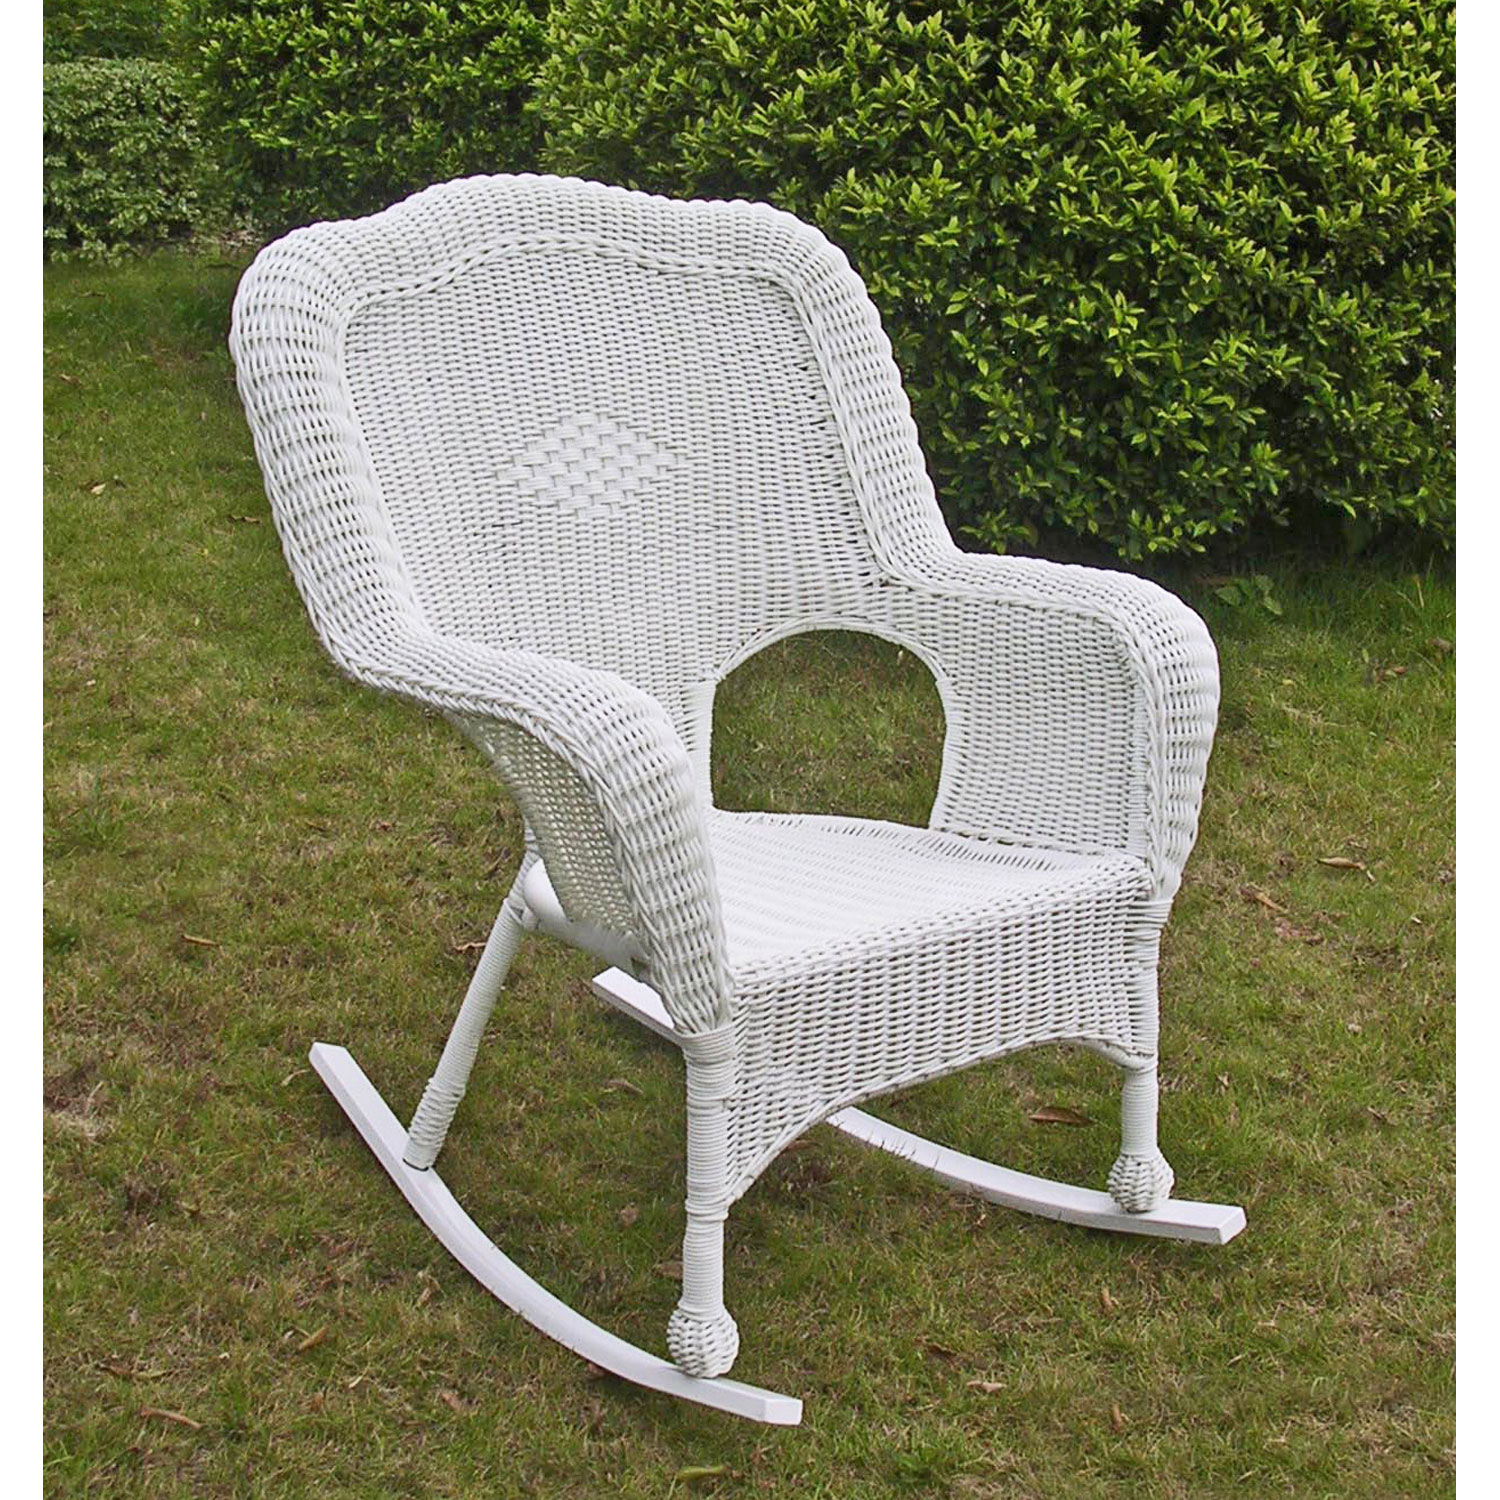 Patio Rocking Chairs Visualhunt, Outdoor Wicker Rocking Chairs White